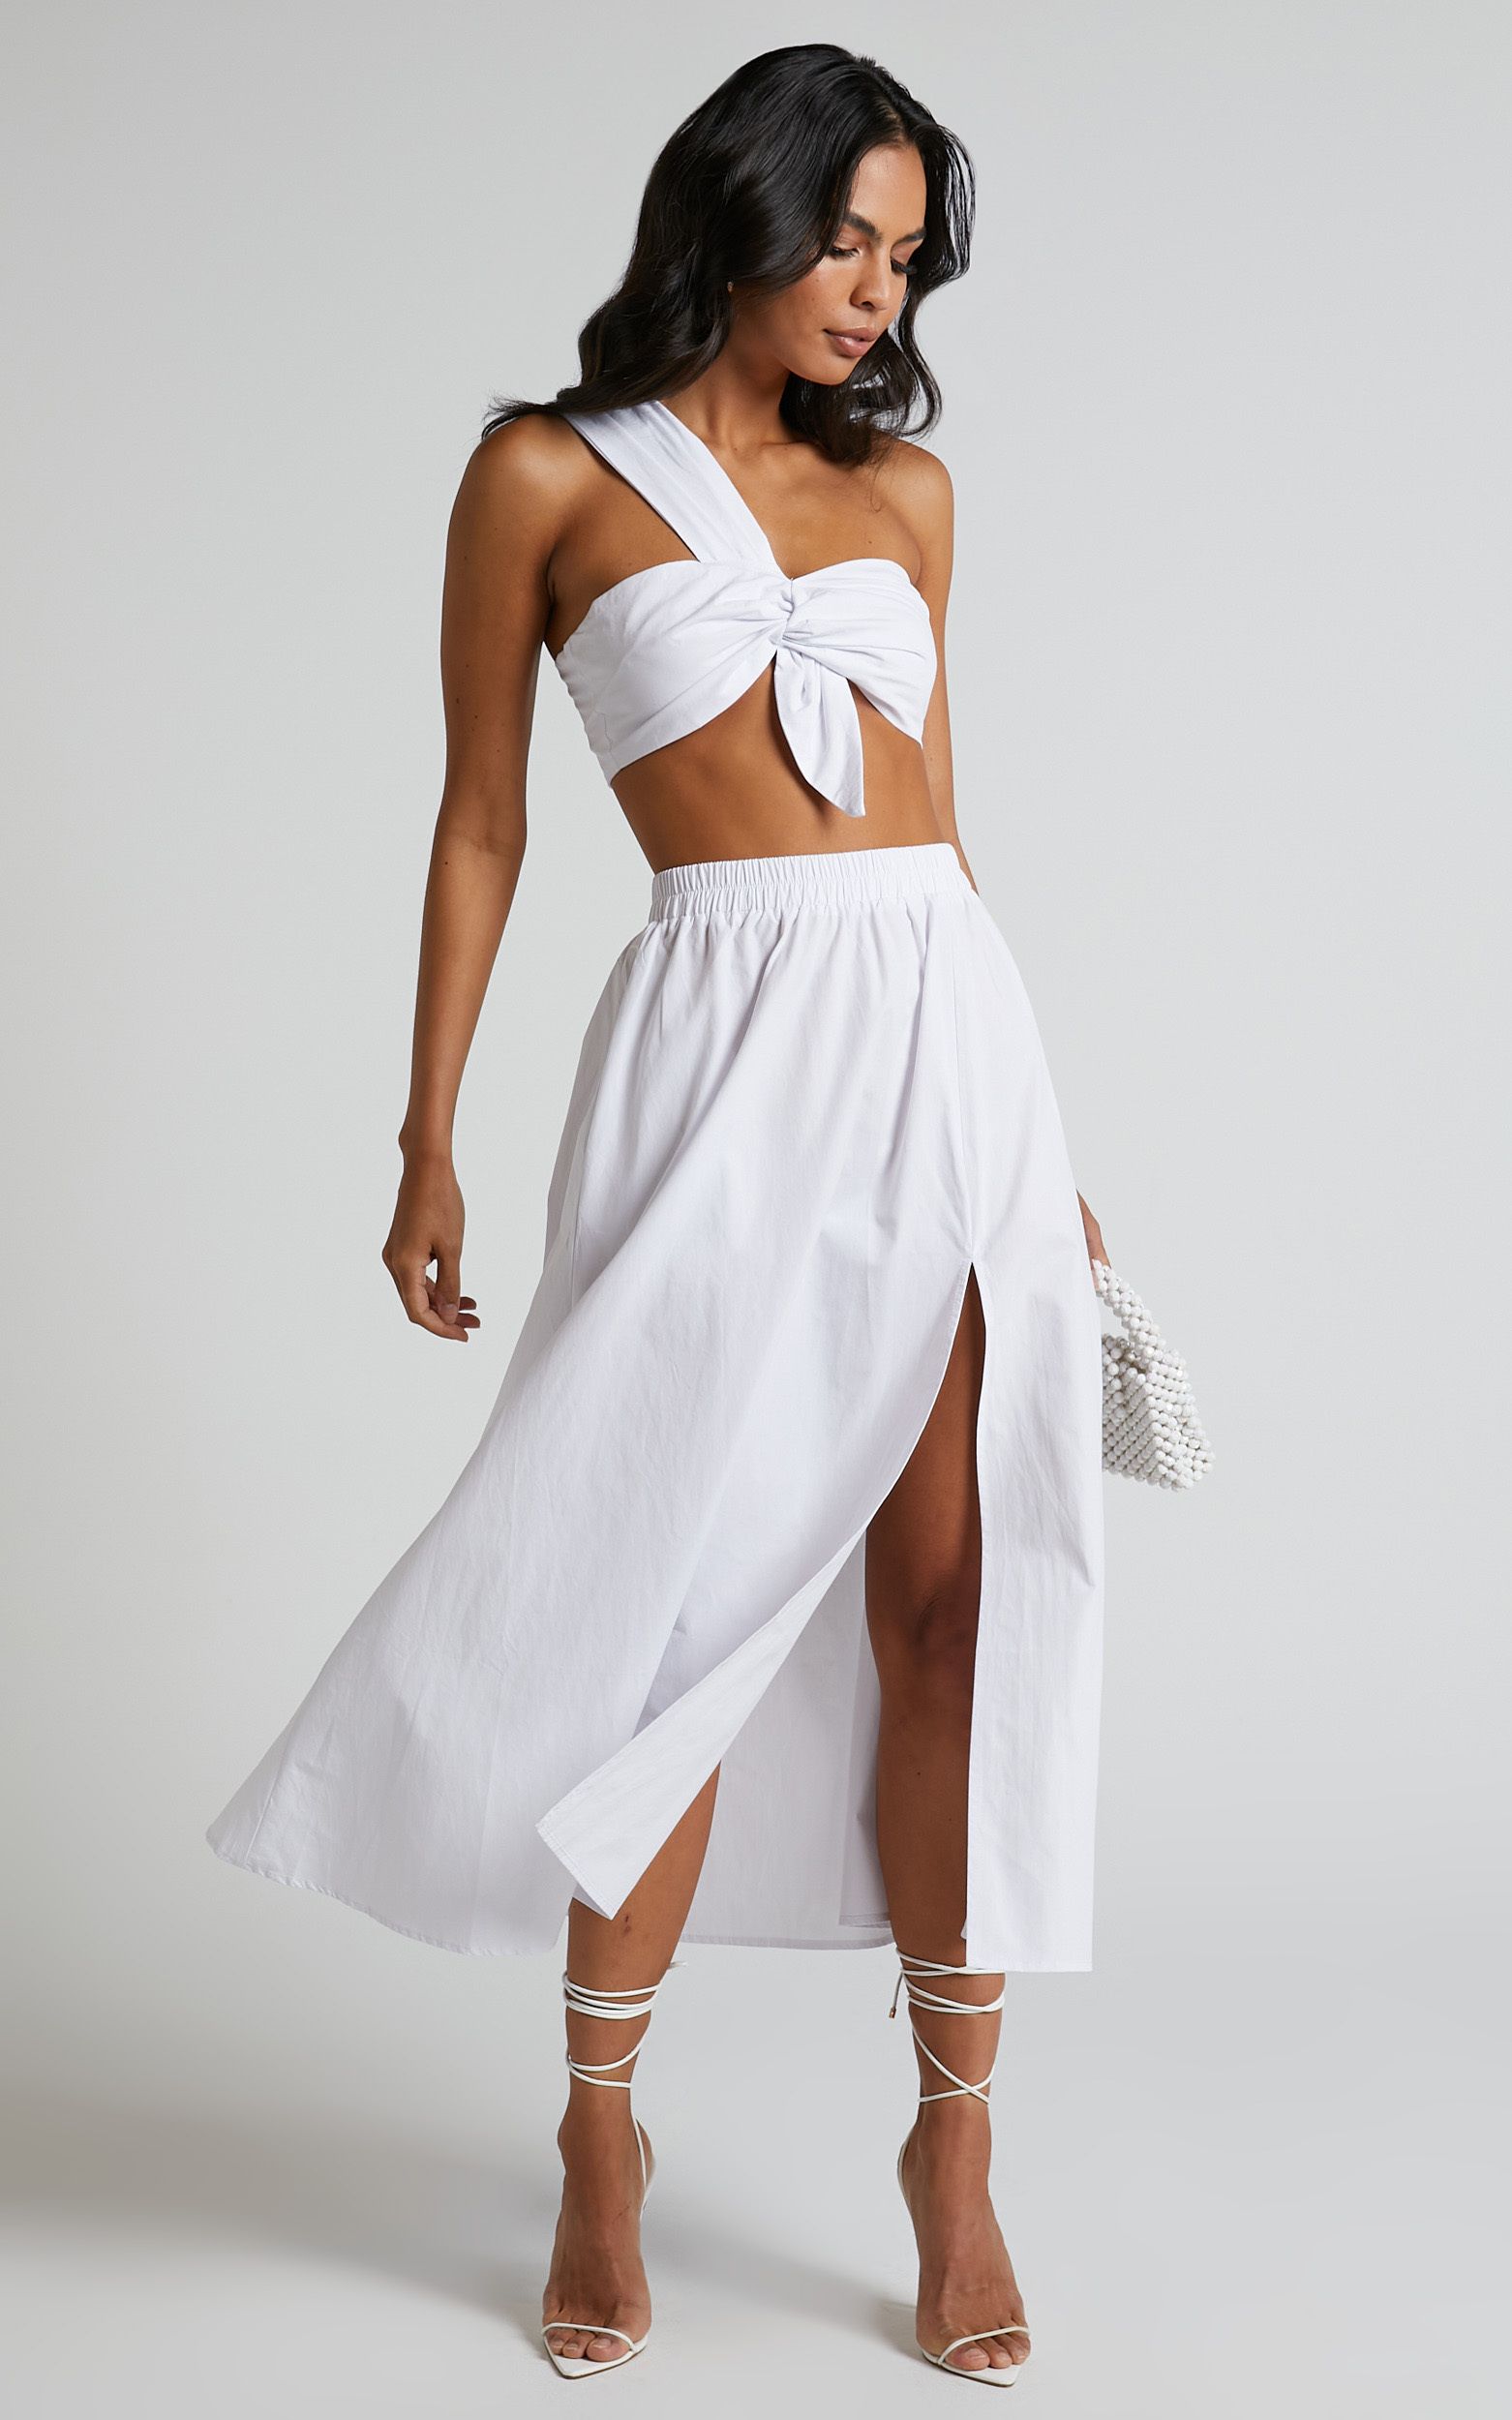 Sula Two Piece Set - One Shoulder Bralette Crop Top and Midi Skirt in White | Showpo (ANZ)